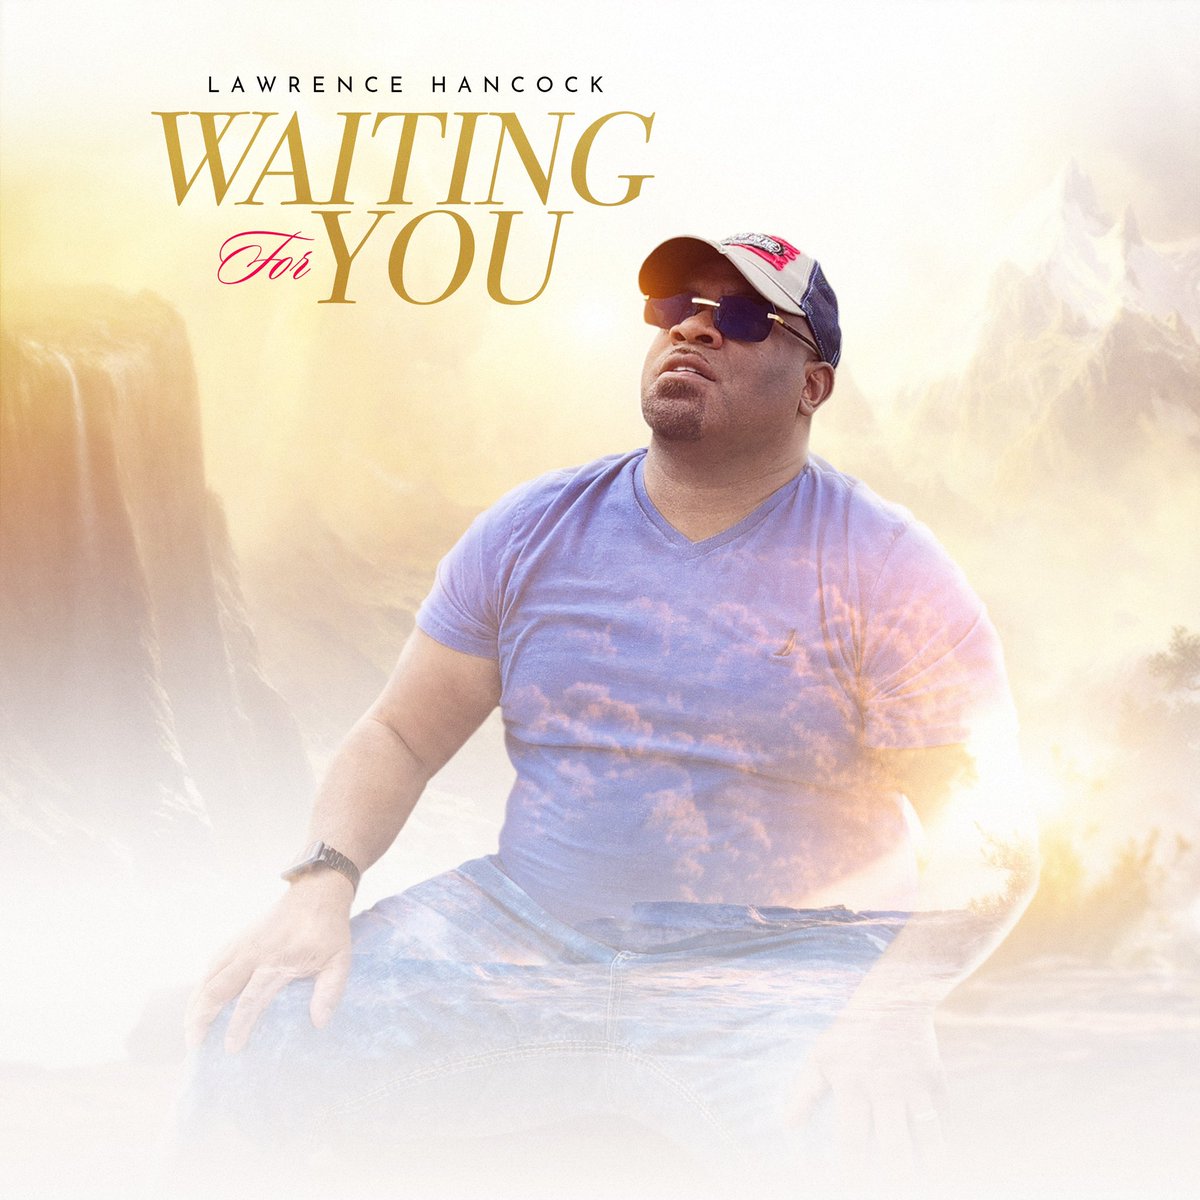 “In 21 Days I get to share with you a collection of music that blew my mind…”
#WaitingForYou
#Album9
#JesusPeep